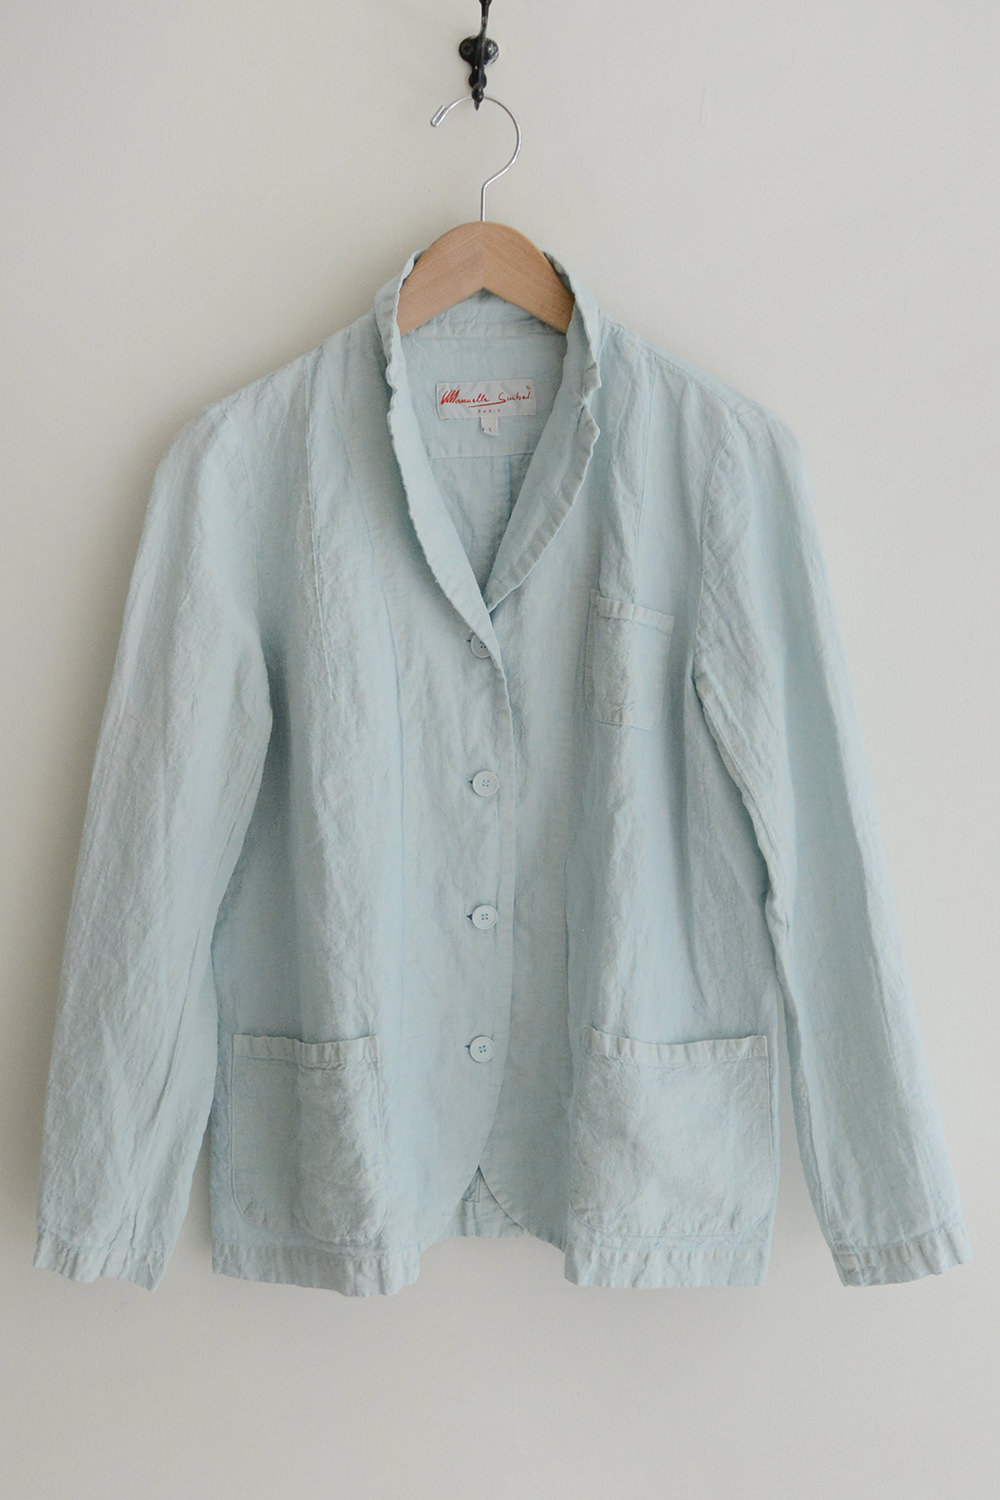 Manuelle Guibal Linen Jacket in Ice Blue Top Picture